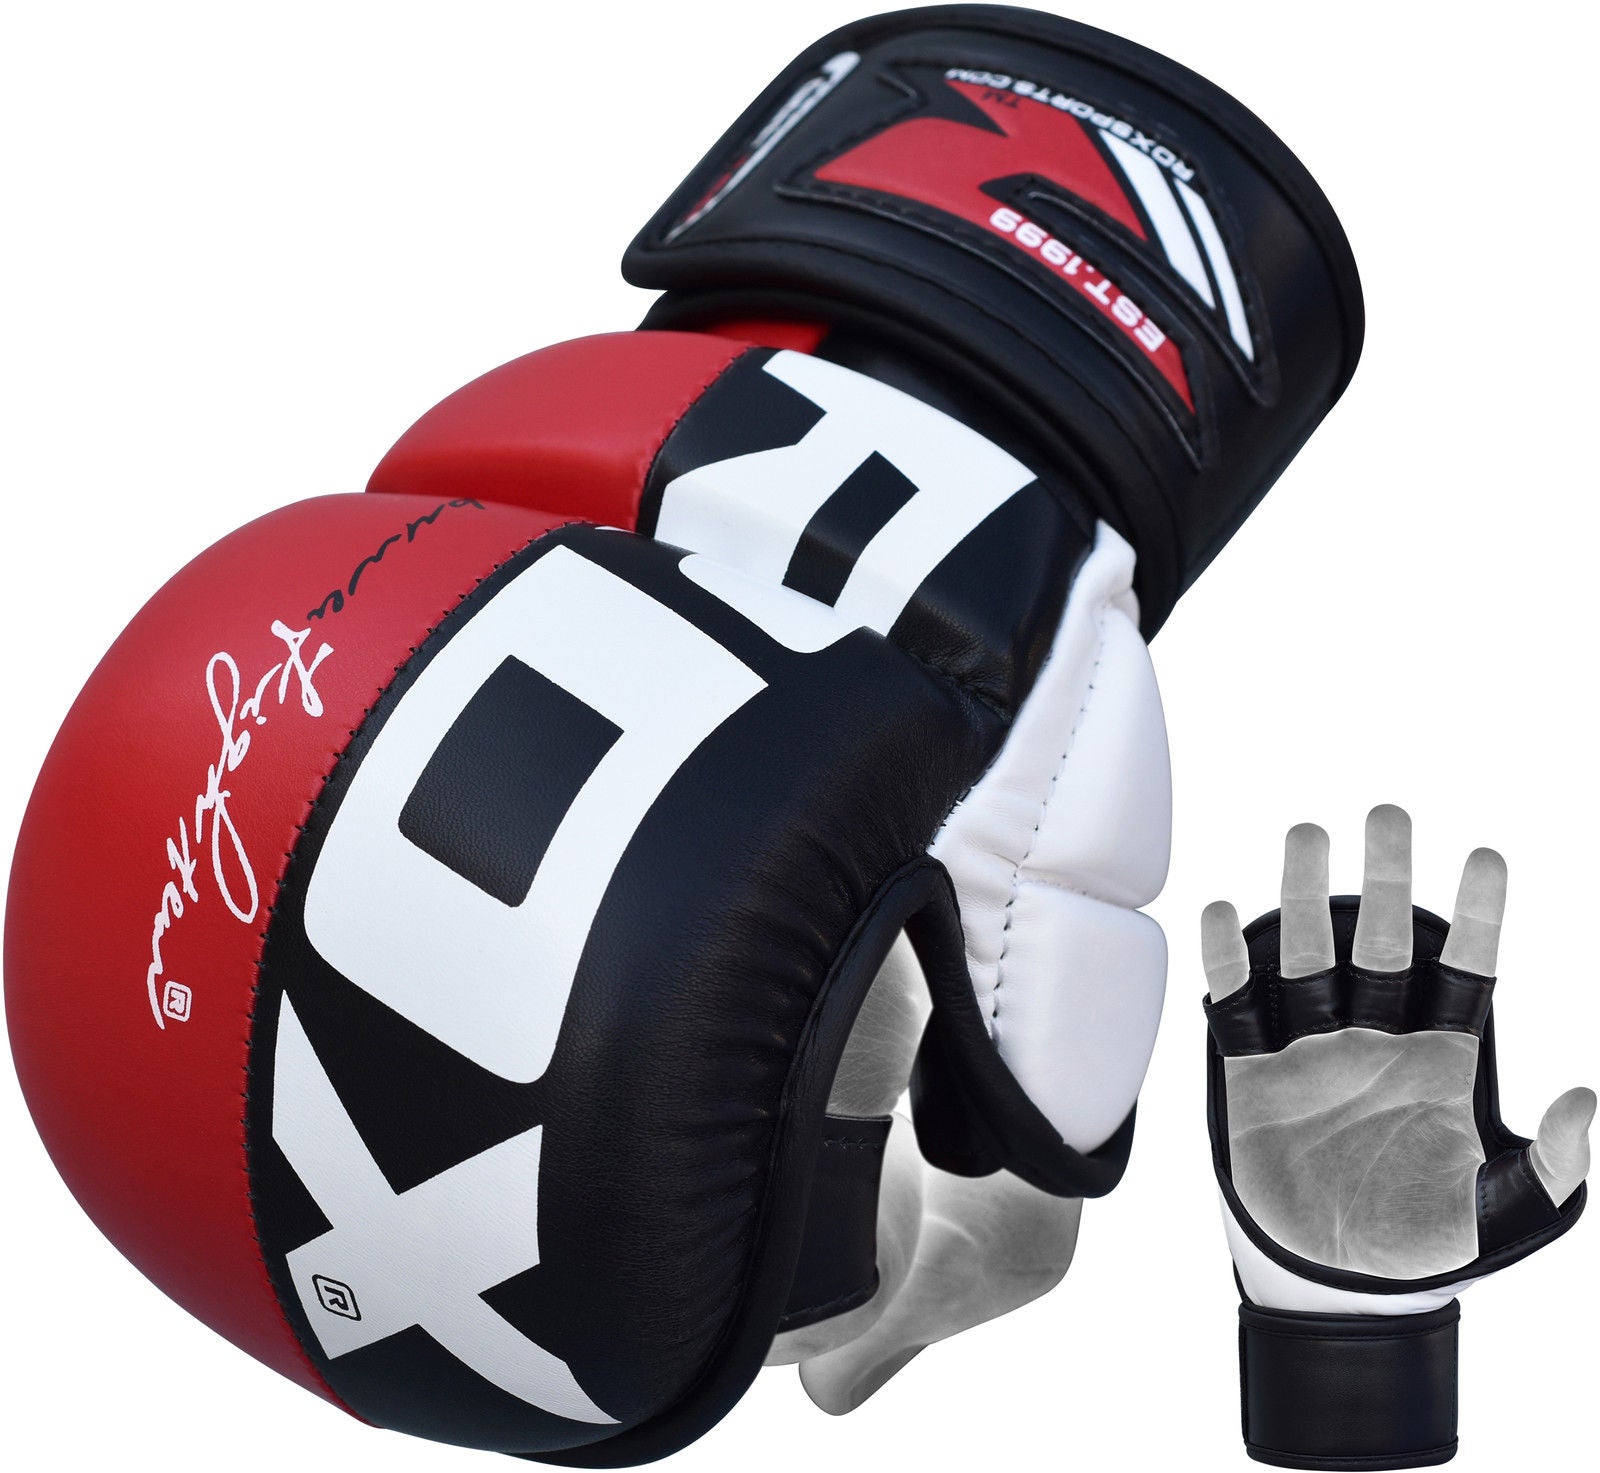 RDX T6 MMA Sparring Gloves - Fight Gear Focus 